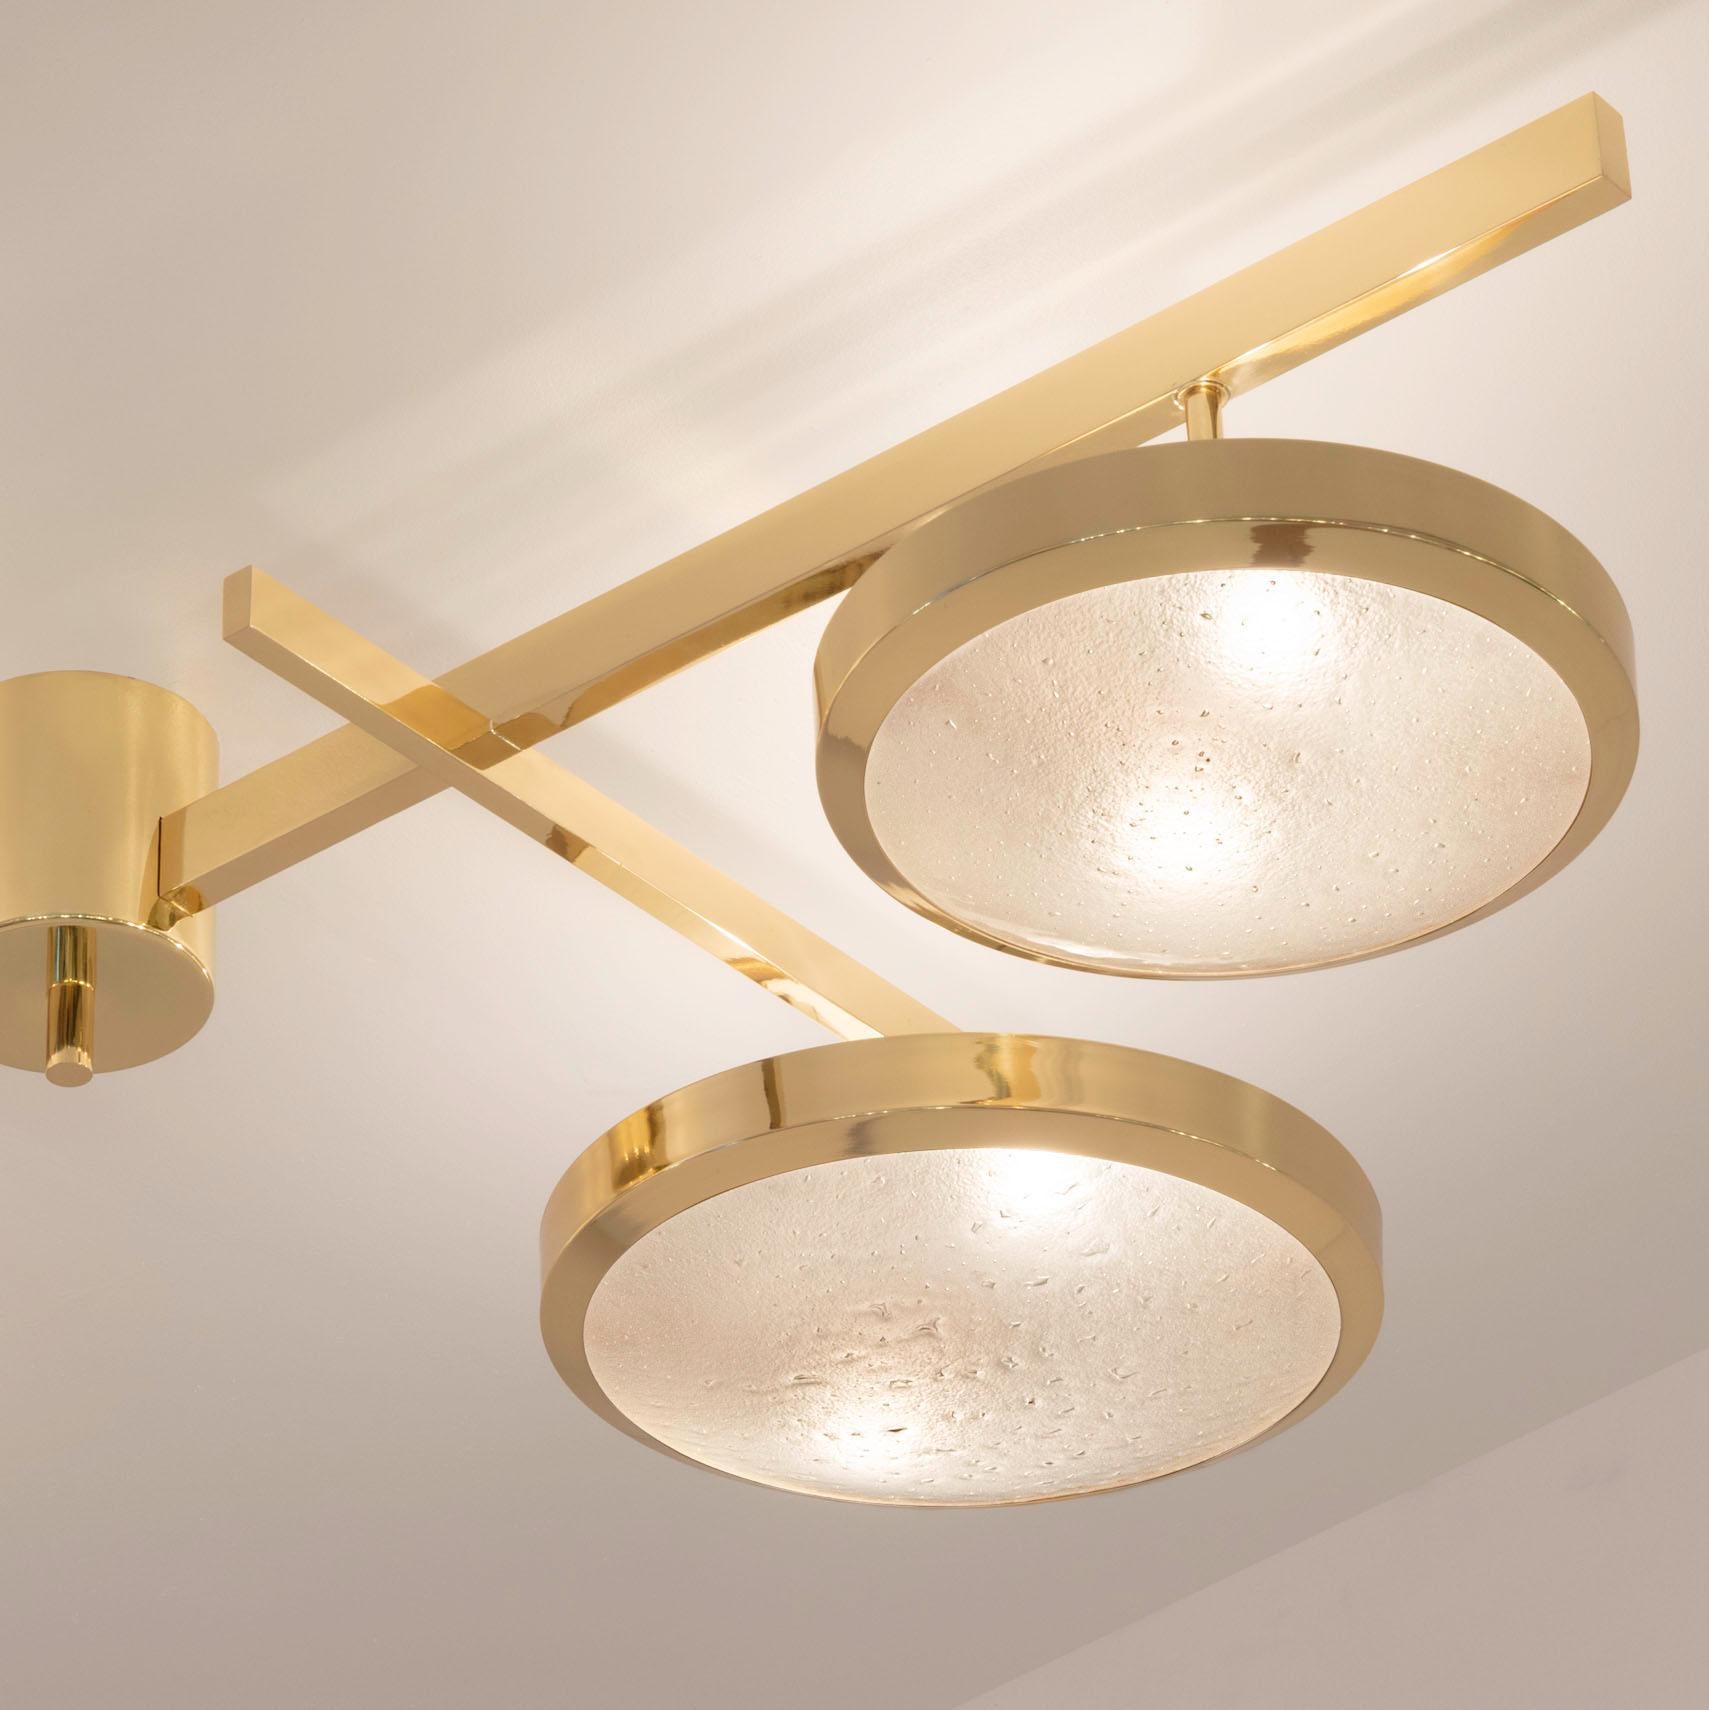 Tetrix Ceiling Light by Gaspare Asaro - Satin Nickel Finish For Sale 3